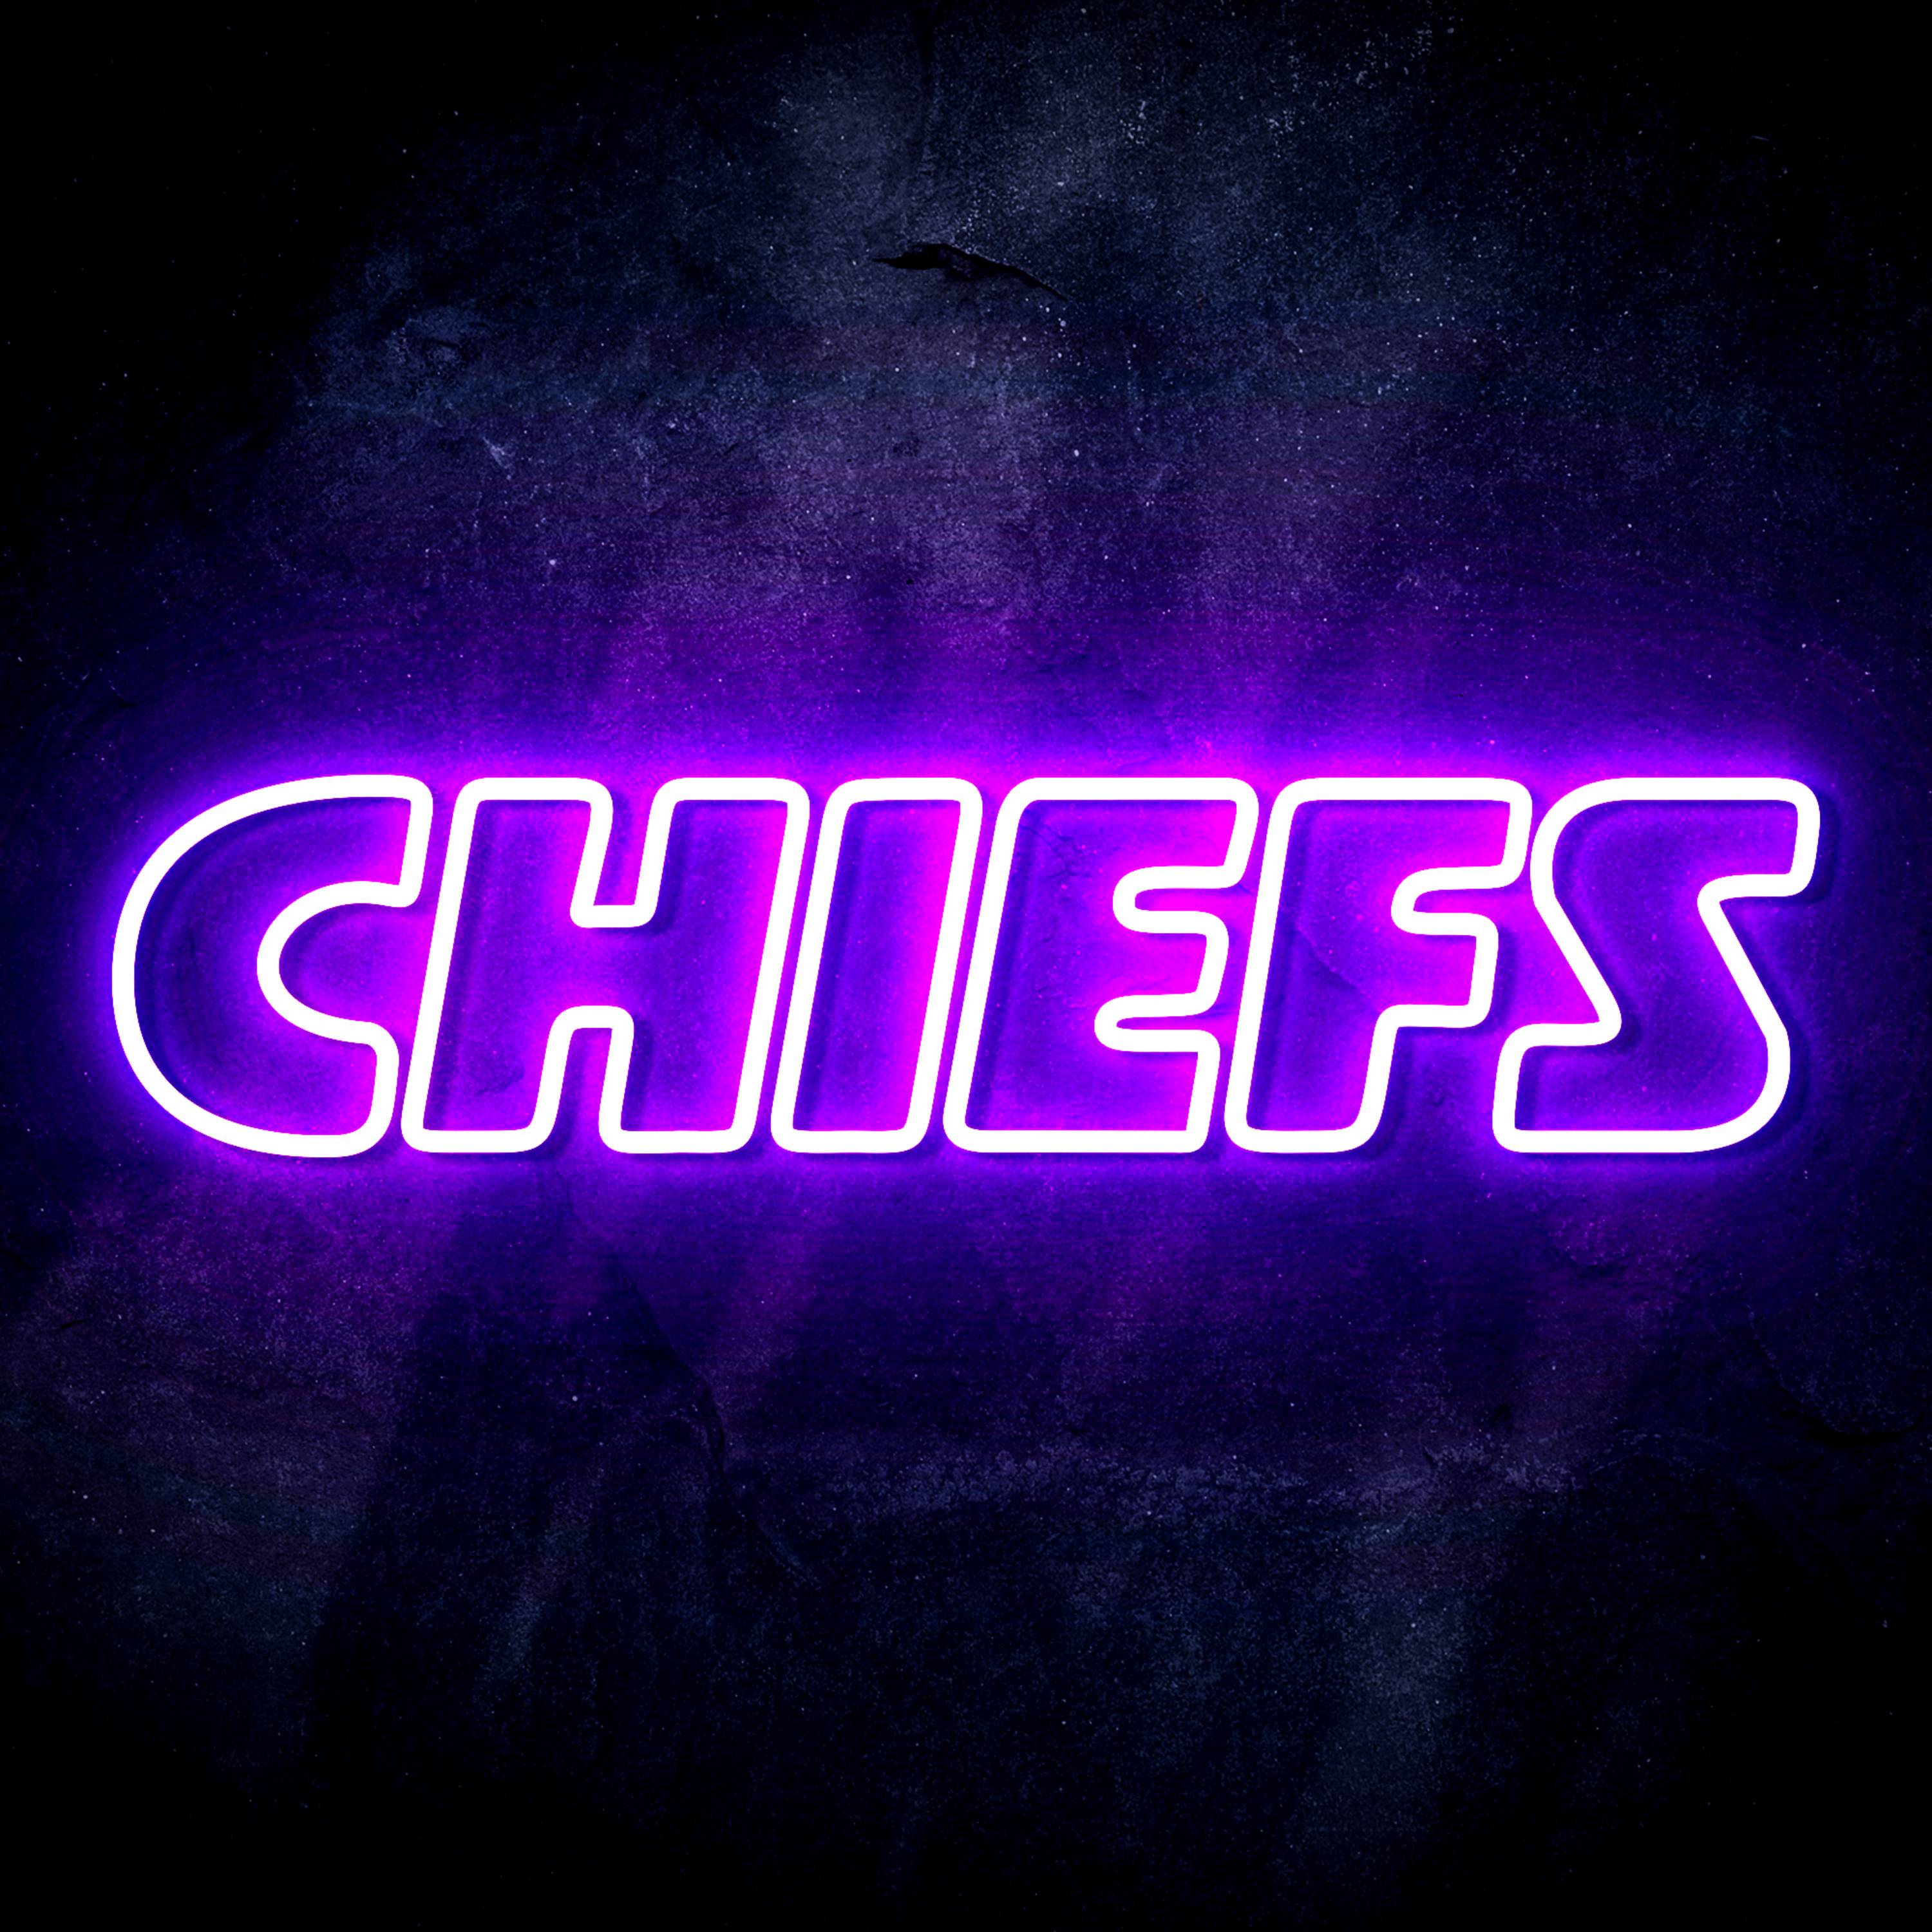 NFL CHIEFS LED Neon Sign